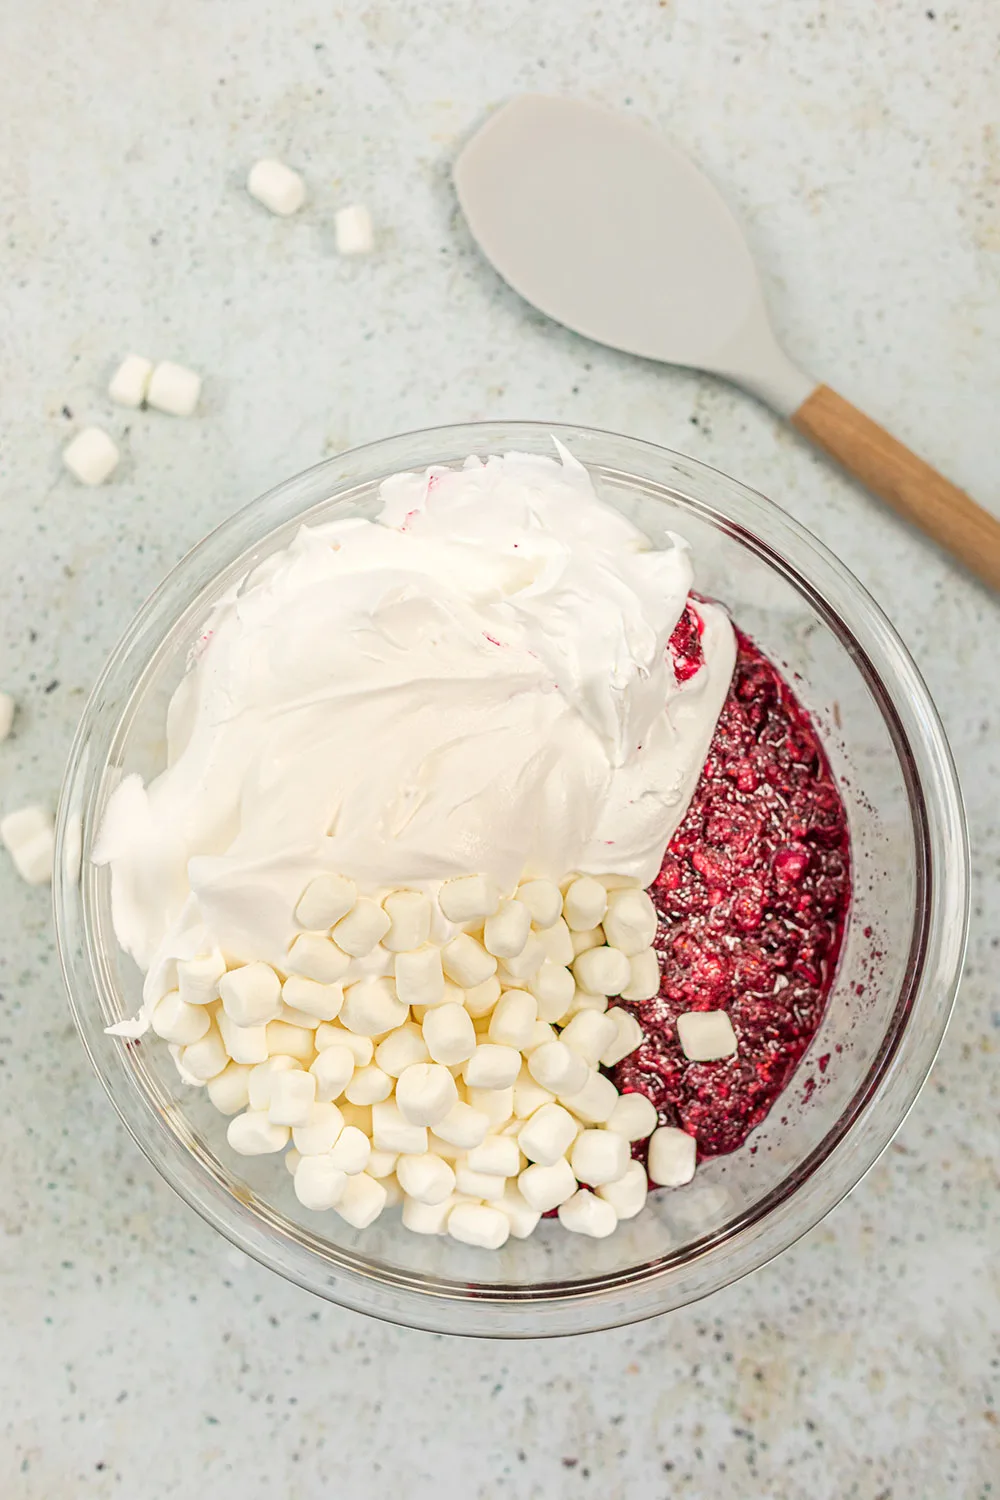 Marshmallows, whipped cream, and cranberries in a bowl.